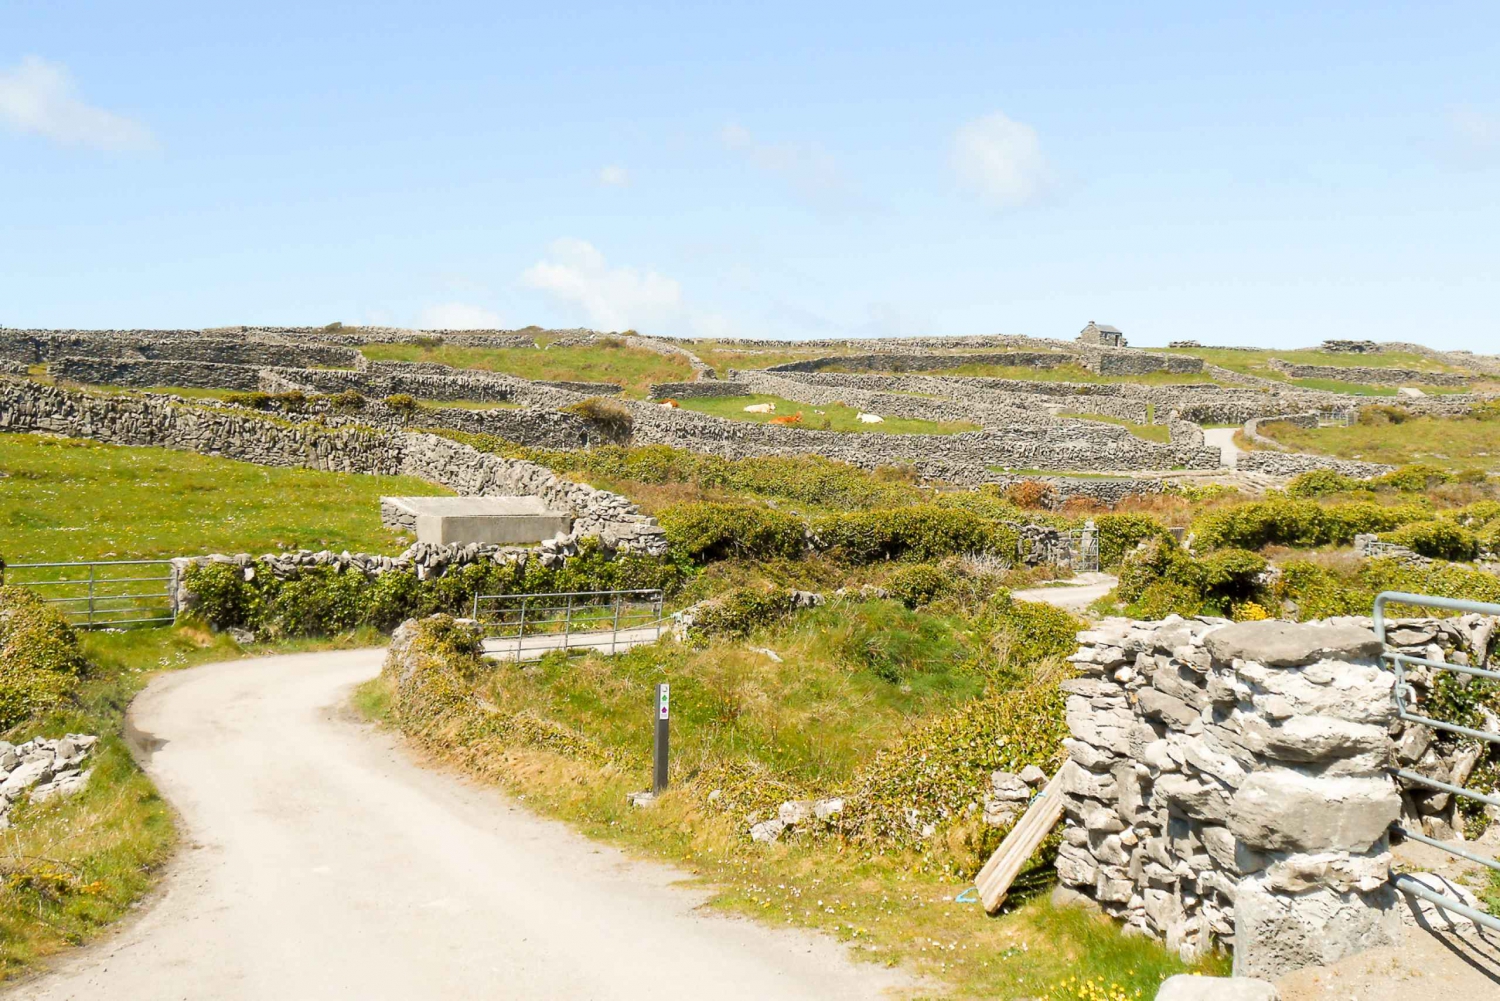 From Galway: Aran Islands & Cliffs of Moher Tour with Cruise